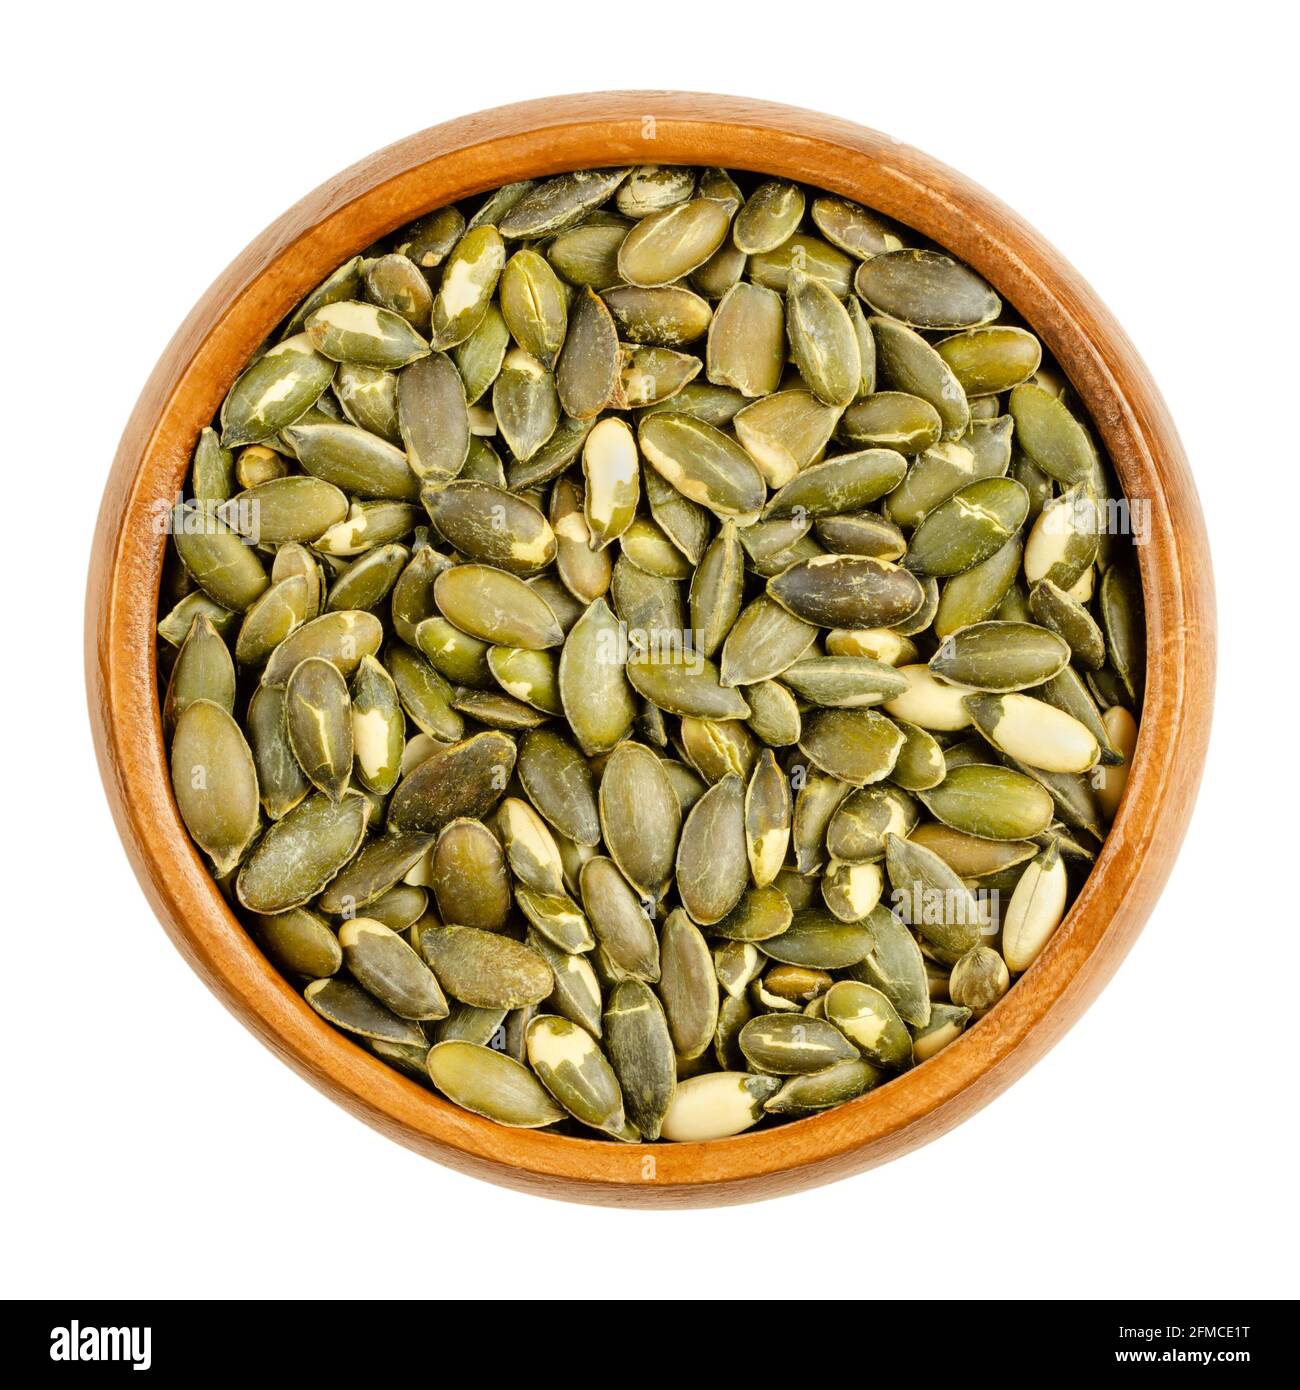 Hulled, roasted, salted pumpkin seeds, in a wooden bowl. Edible, flat,  green squash seeds, also known as pepitas, used as a snack Stock Photo -  Alamy